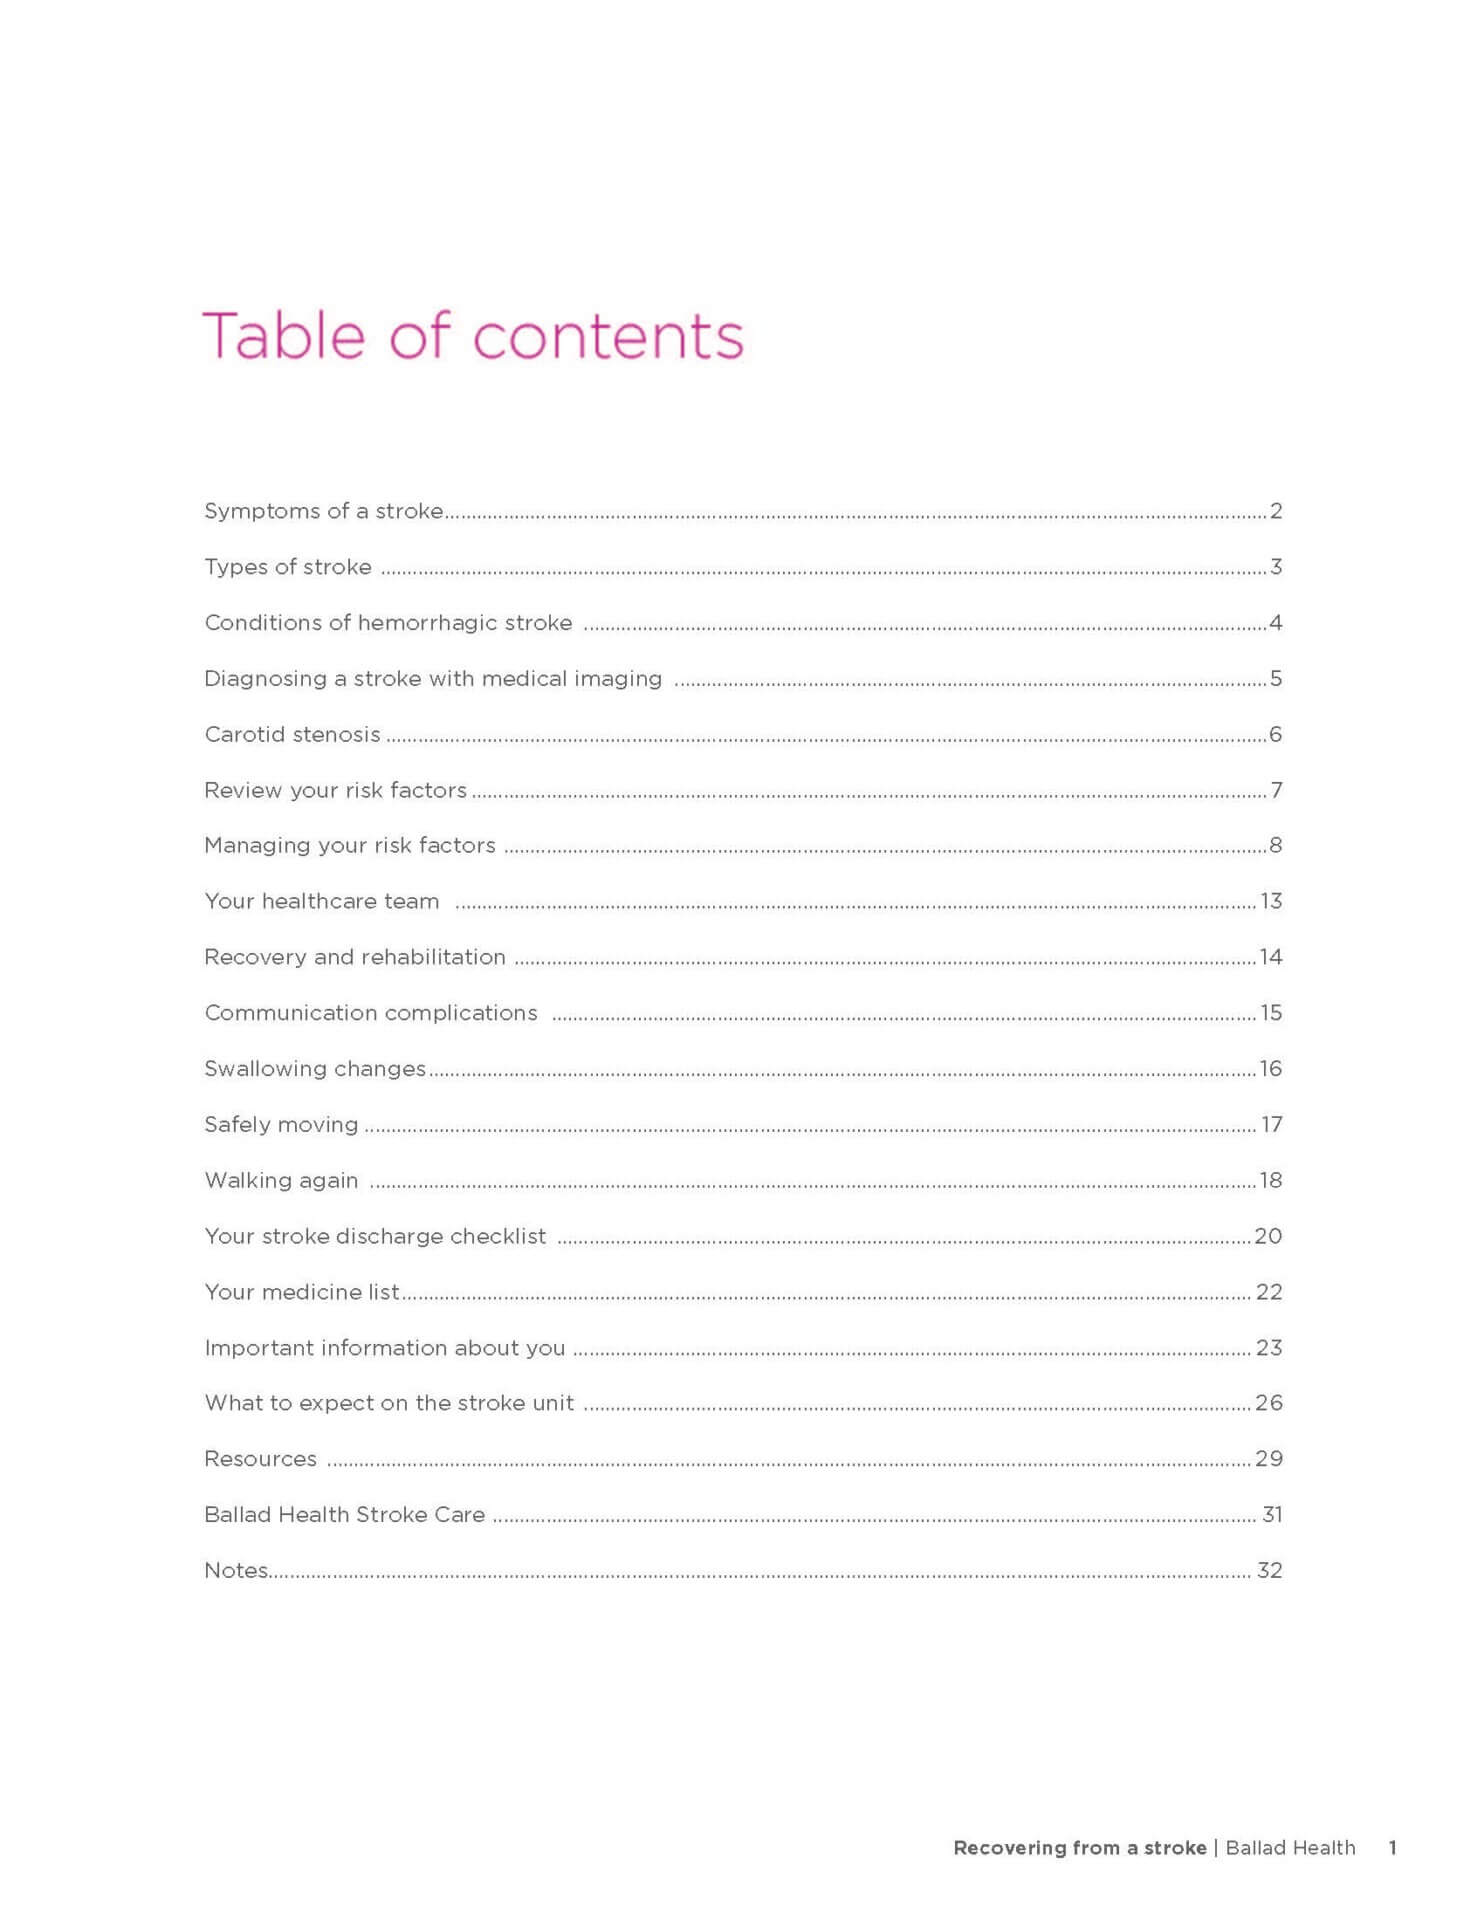 Stroke booklet - table of contents